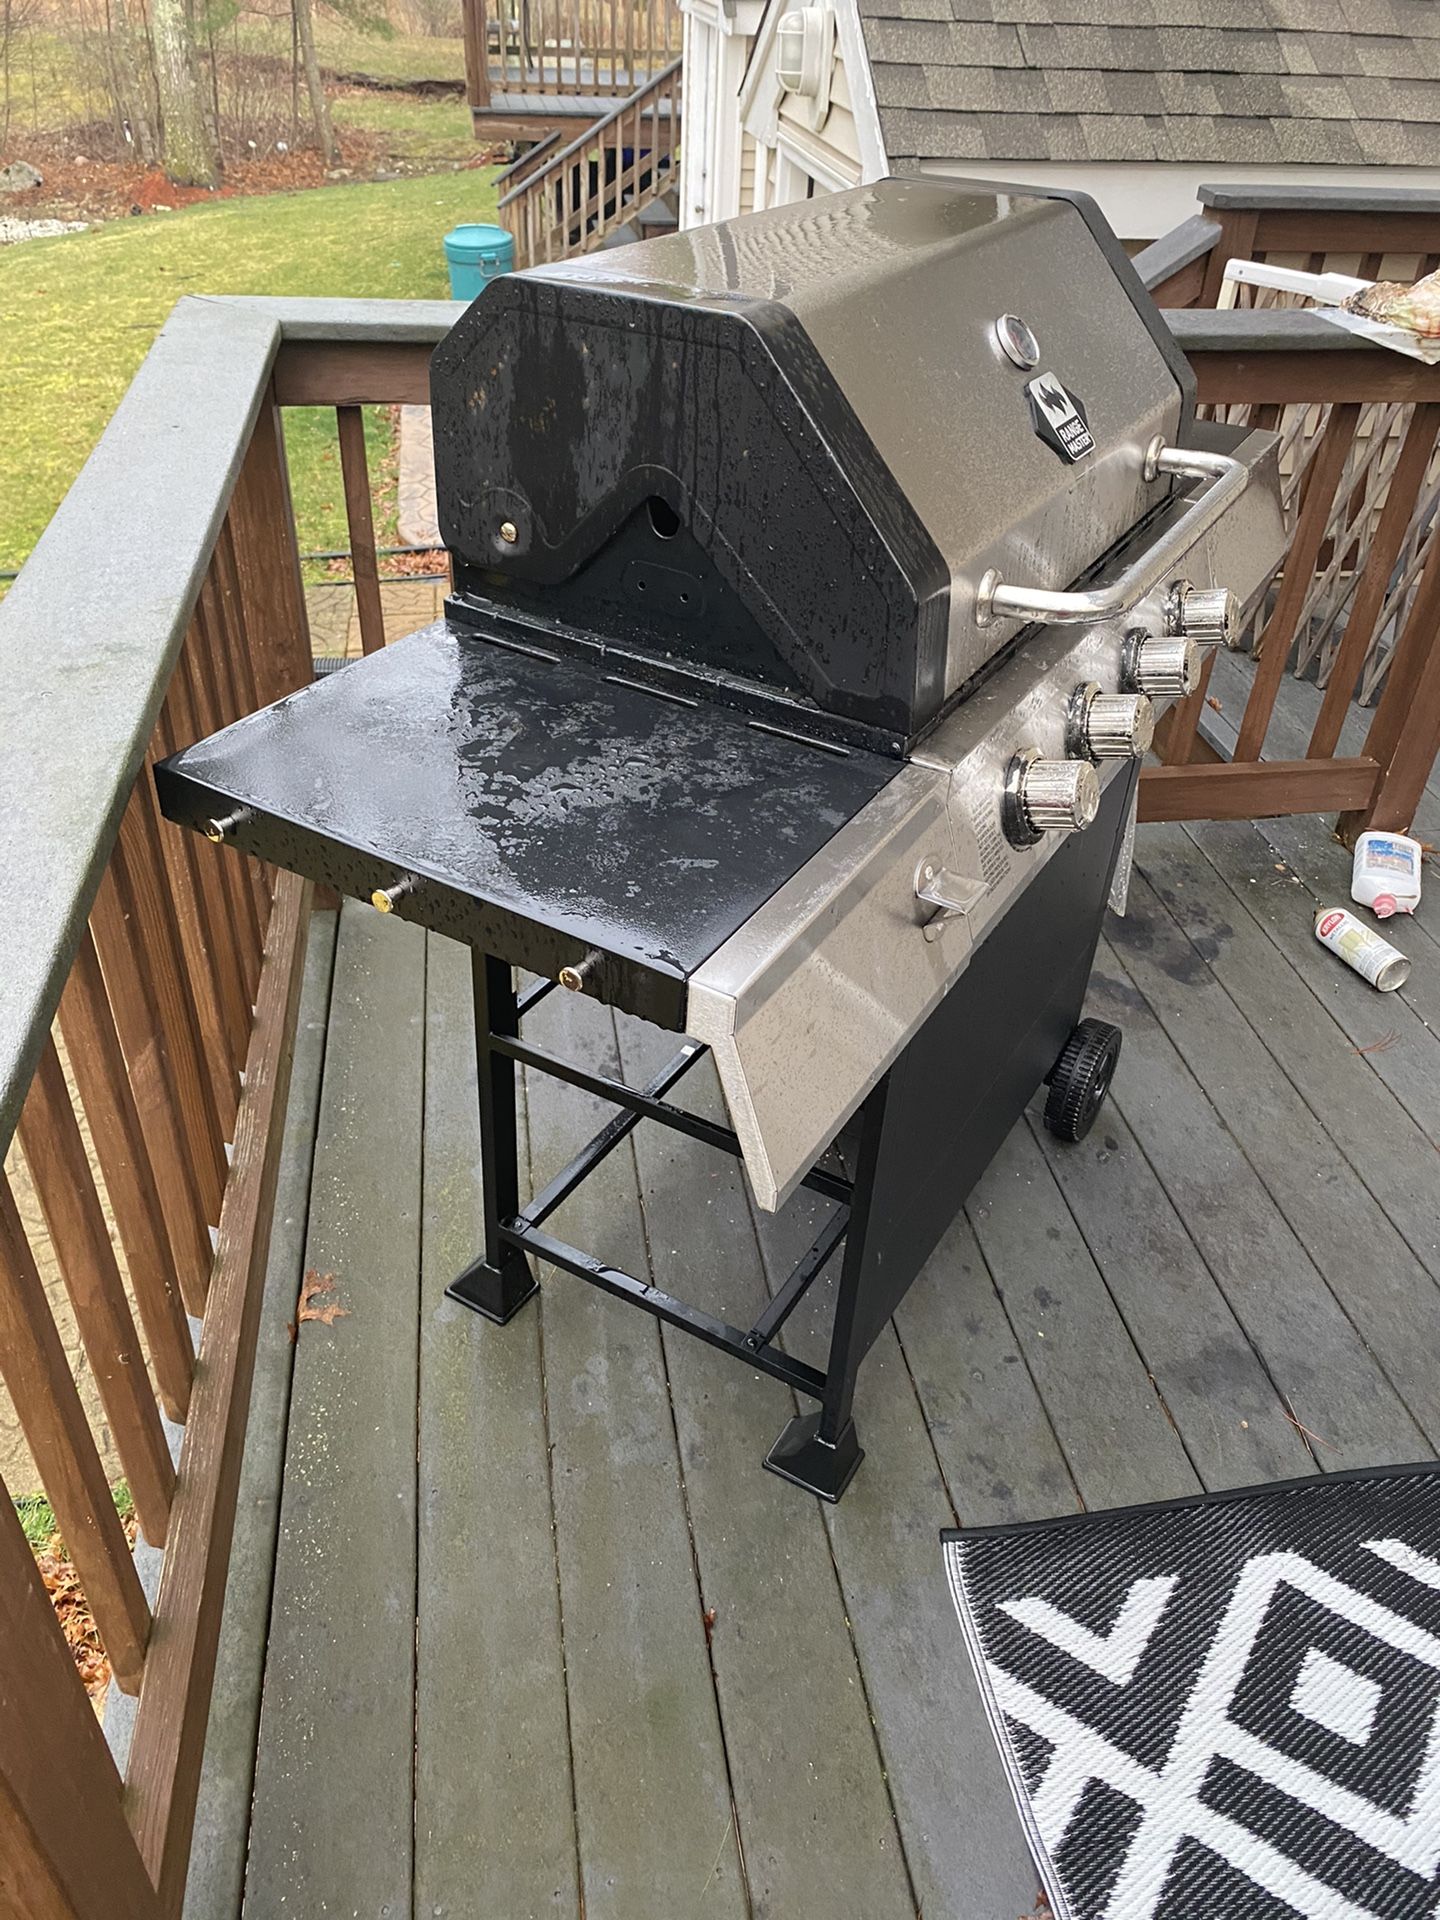 GAS GRILL - FAIRLY NEW